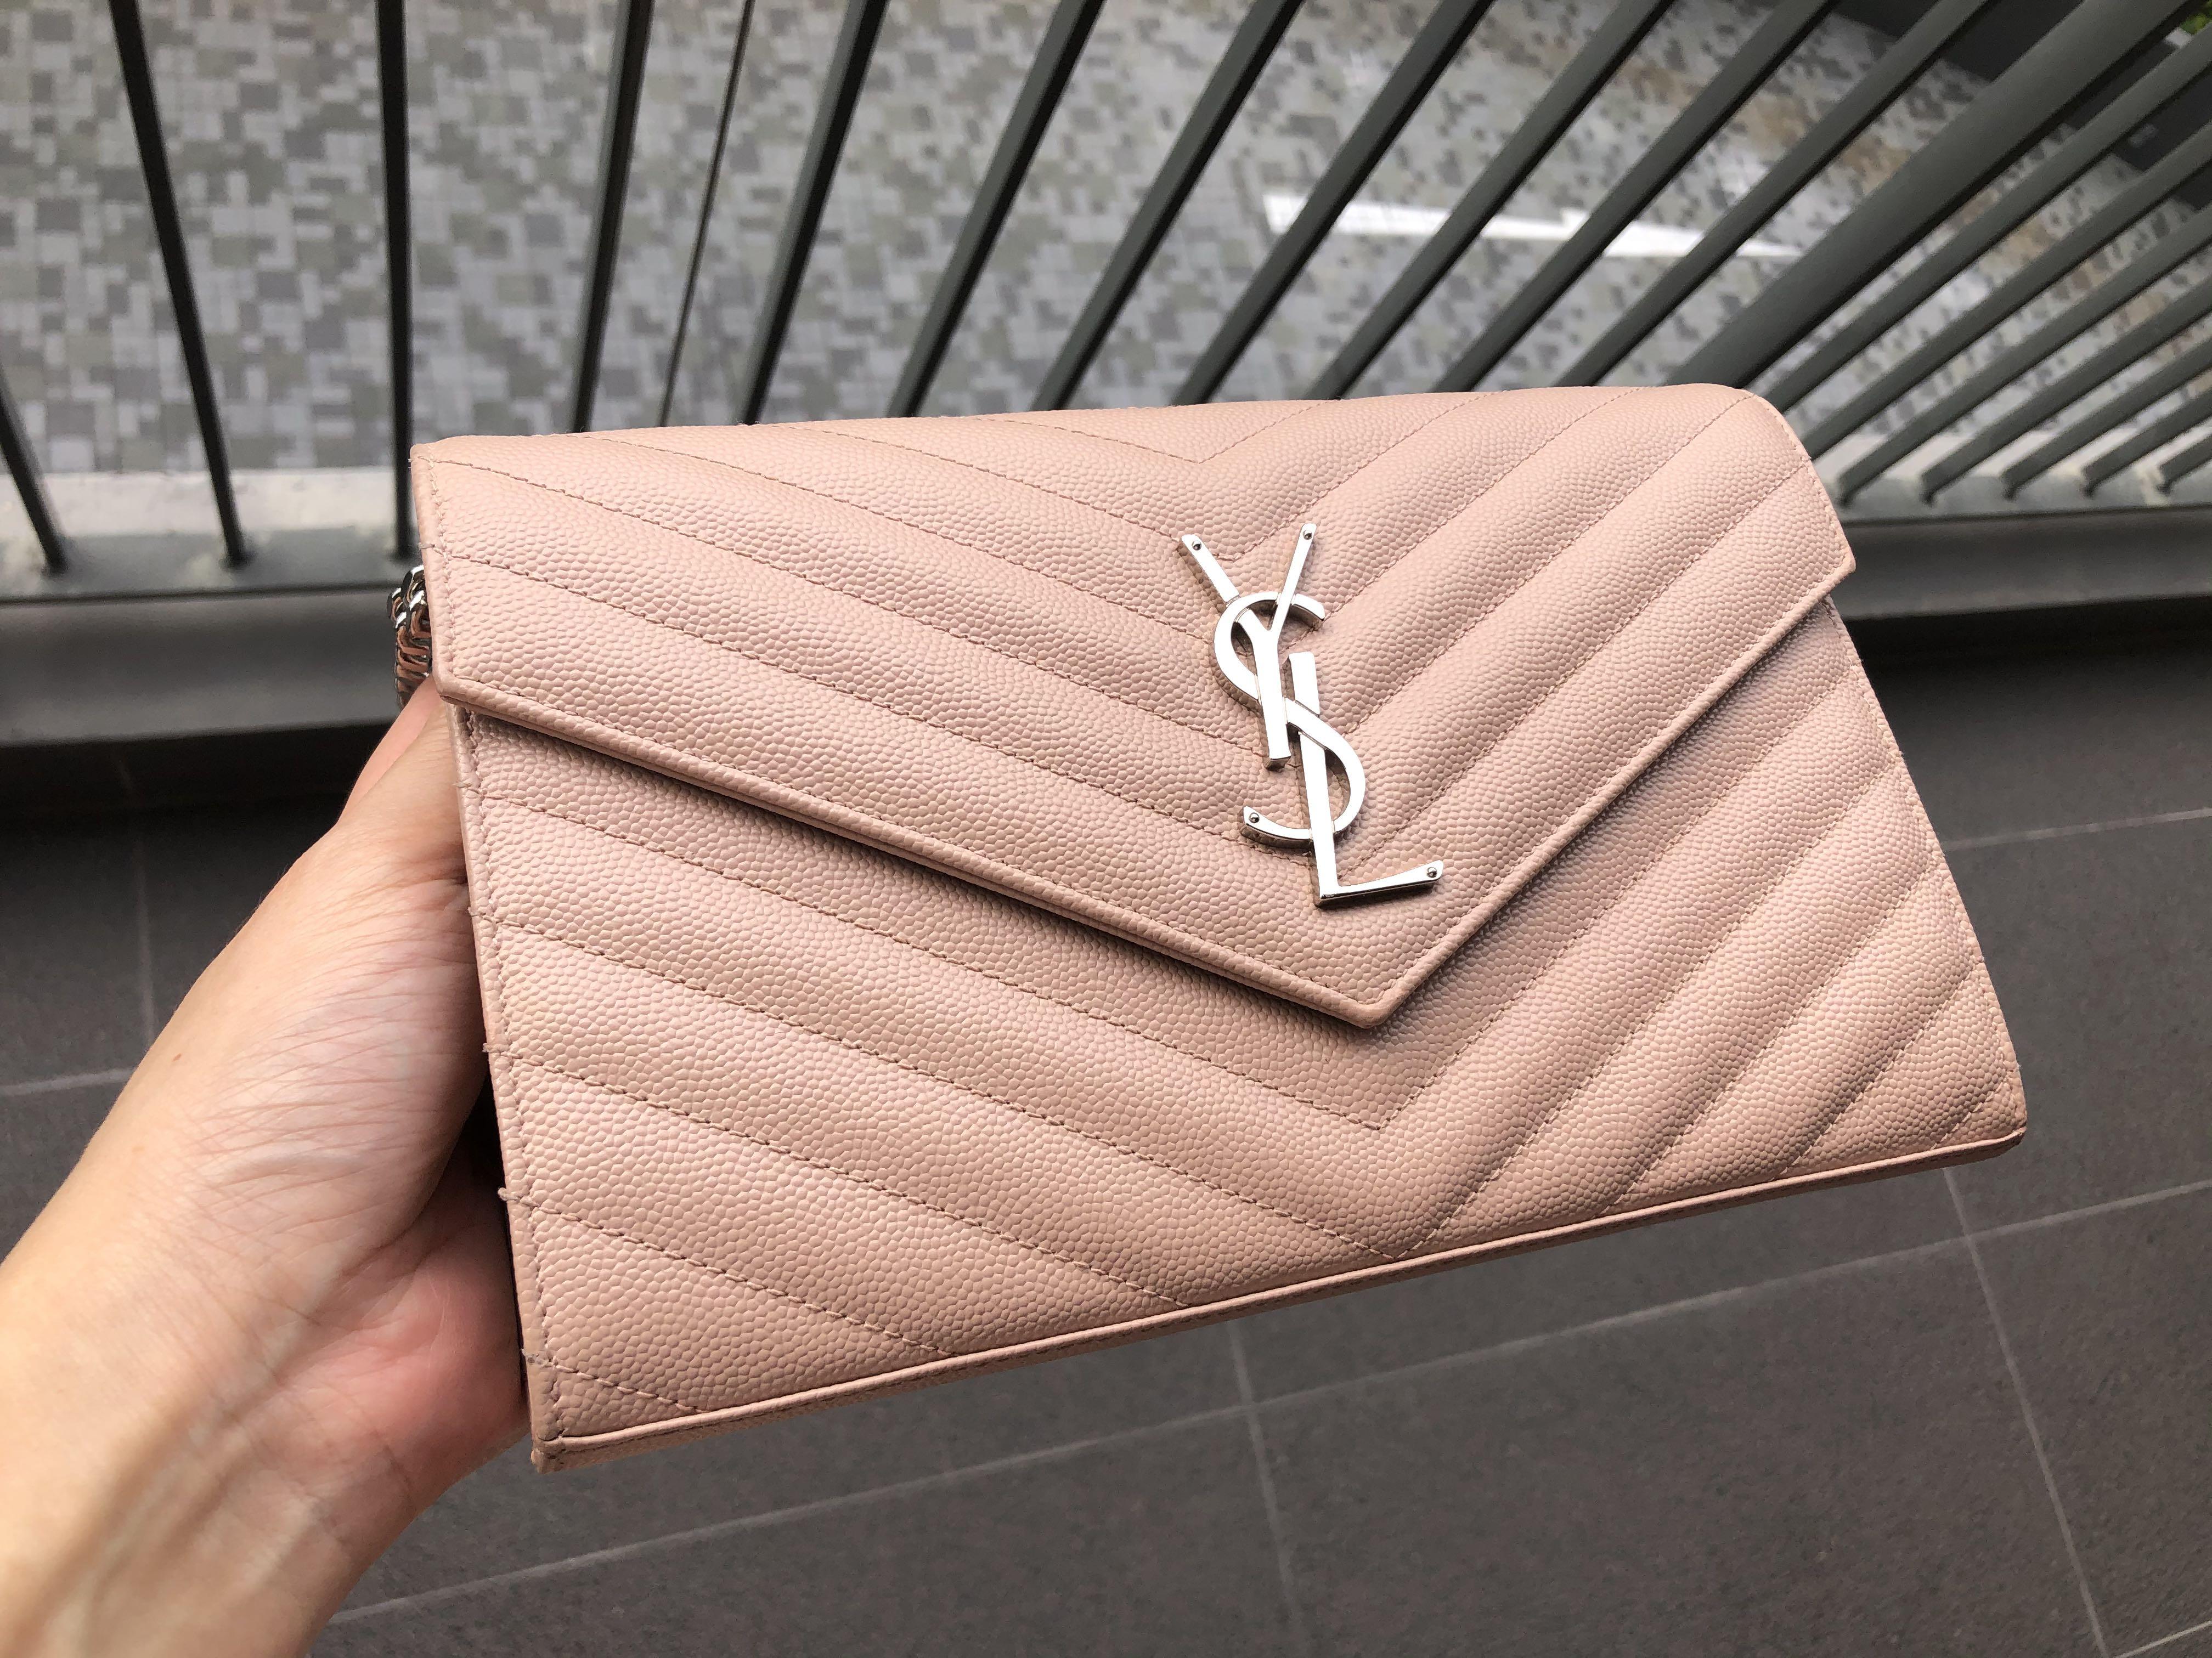 Auth Saint Laurent Fold Purse Monogram Long Wallet YSL Pink Leather Italy